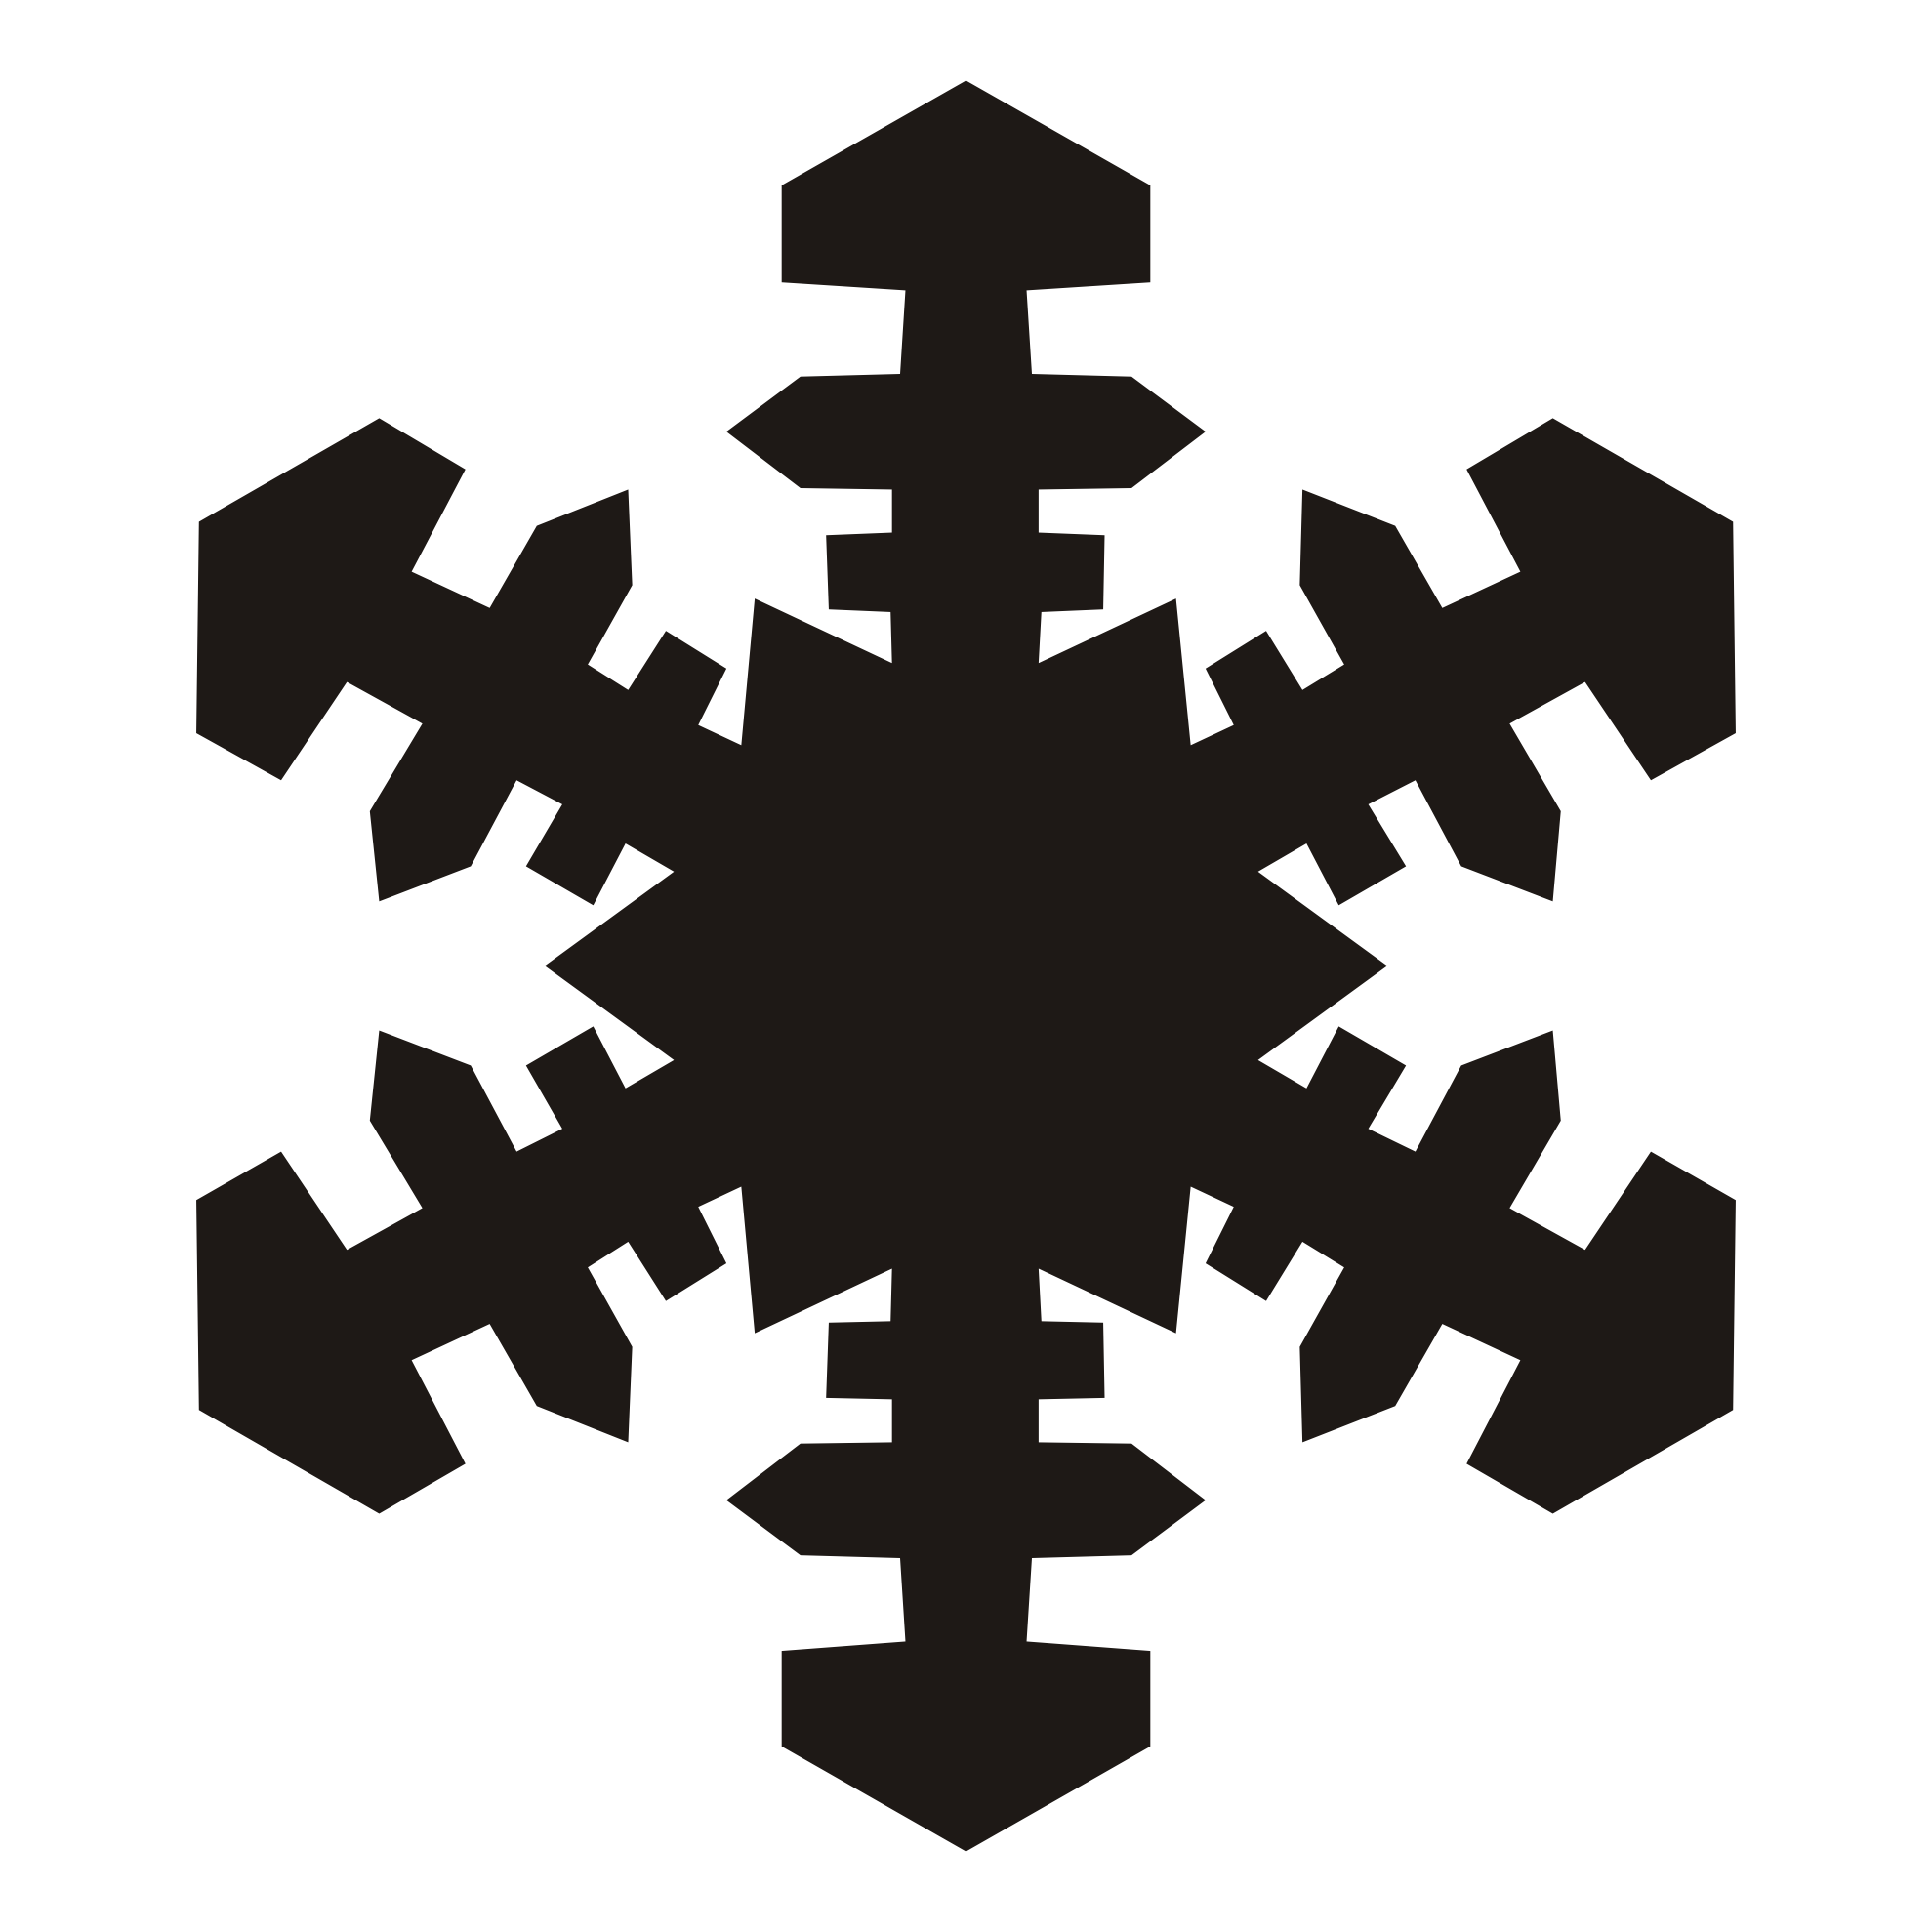 Free Snowflake Silhouette Cliparts, Download Free Clip Art